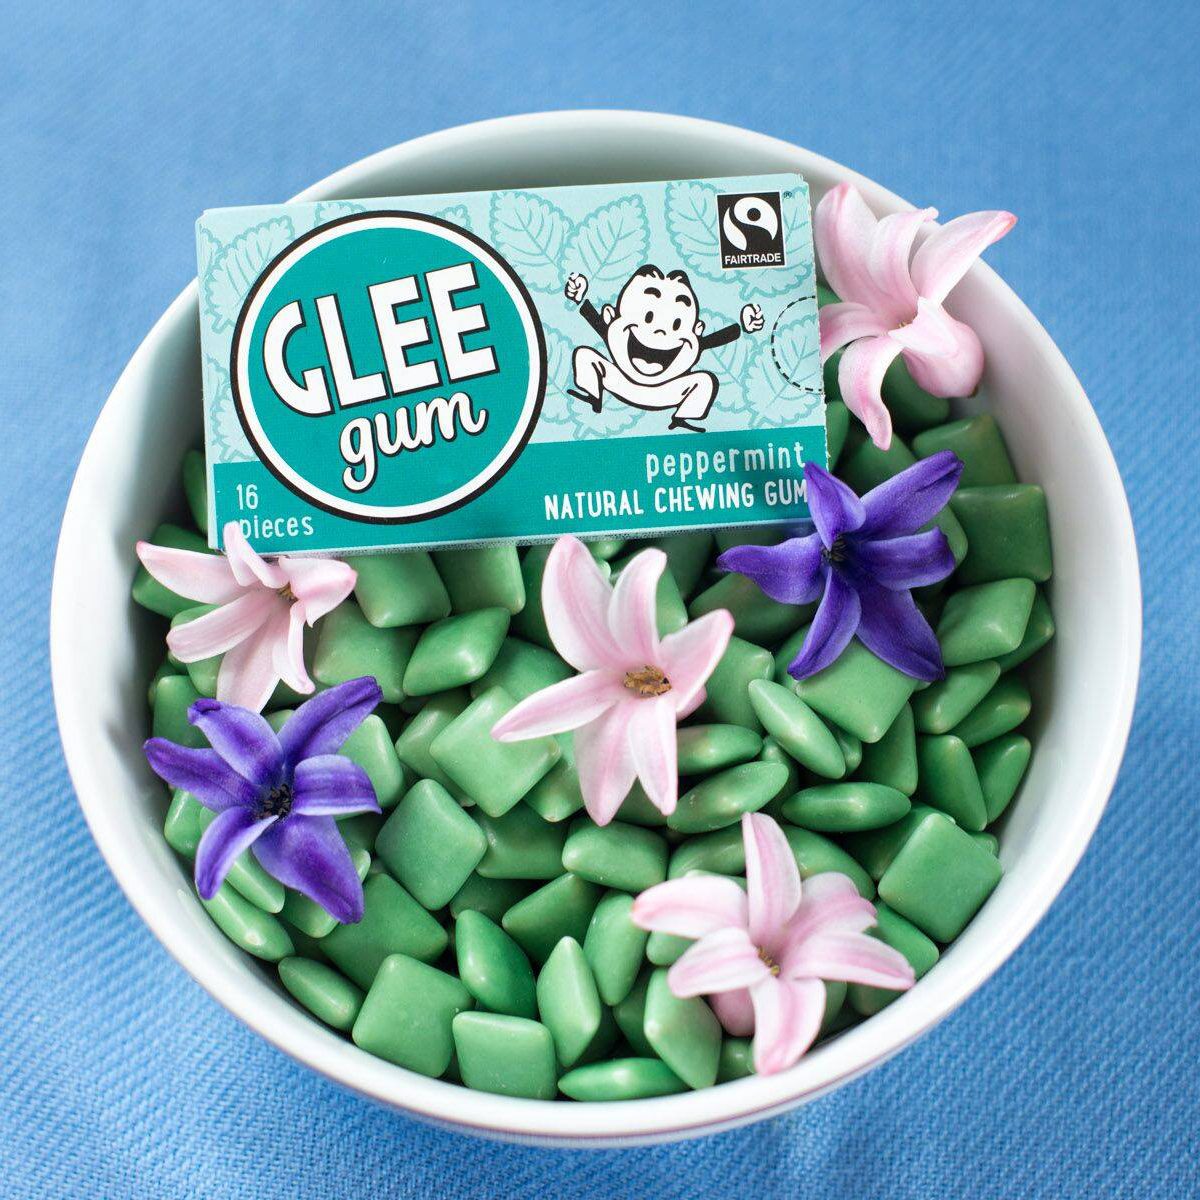 <p><strong><a class="SWhtmlLink" href="http://www.gleegum.com/" rel="noopener">Glee Gum</a> (Verve, Inc.), Providence</strong></p> <p>This woman-owned business takes chewing gum back to its roots, importing chicle tree sap from Guatemala and making gum the old-fashioned way. Parents love Glee Gum because it doesn't contain any preservatives, sweeteners or artificial flavors.</p>